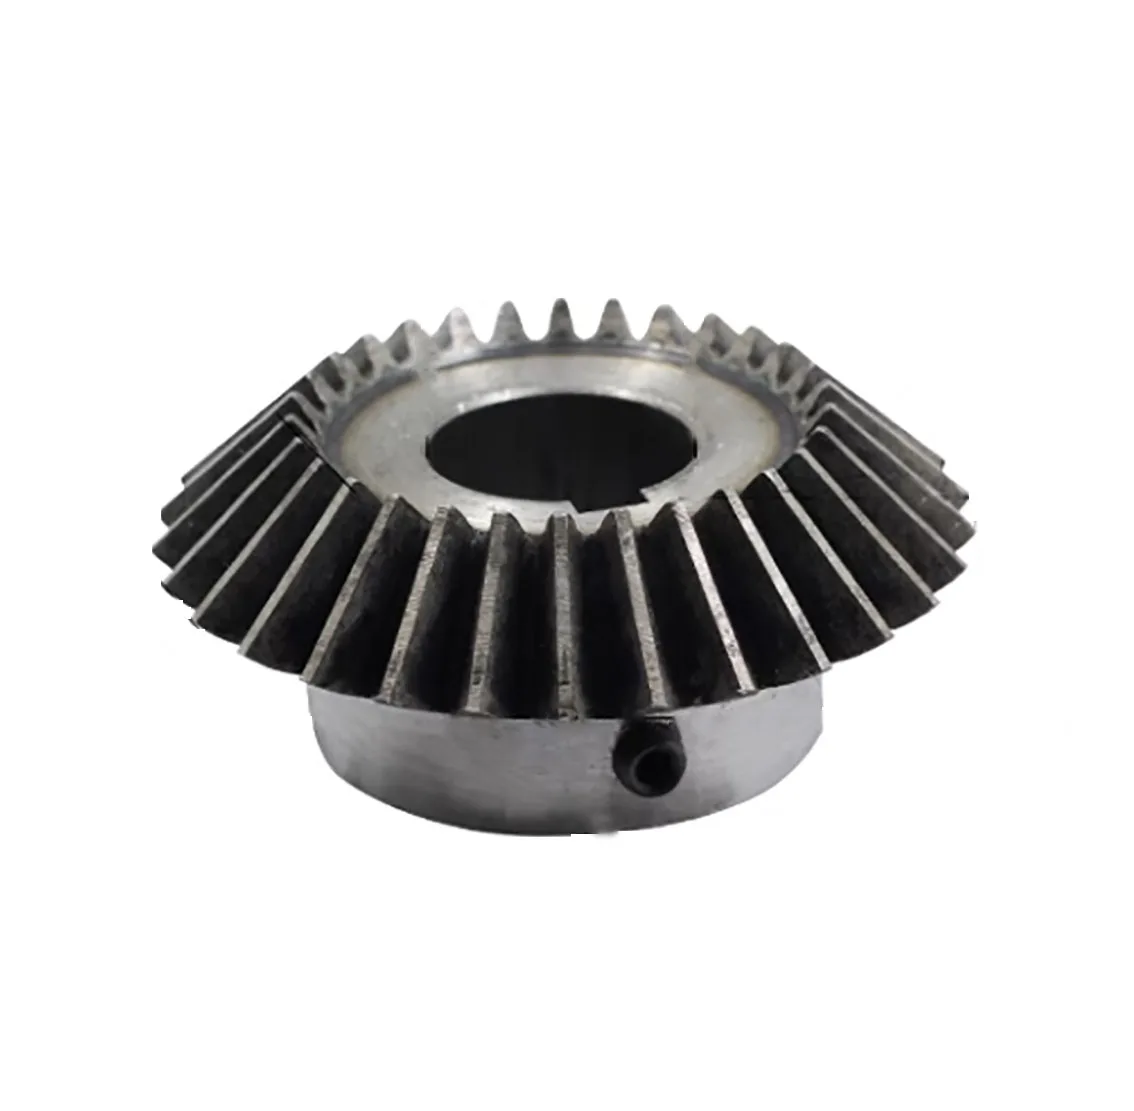 

1Pcs 30 Tooth 3 Module Bevel Gear With Keyway 1:1 90 Degrees 45# Steel Mechanical Power Transmission Gear